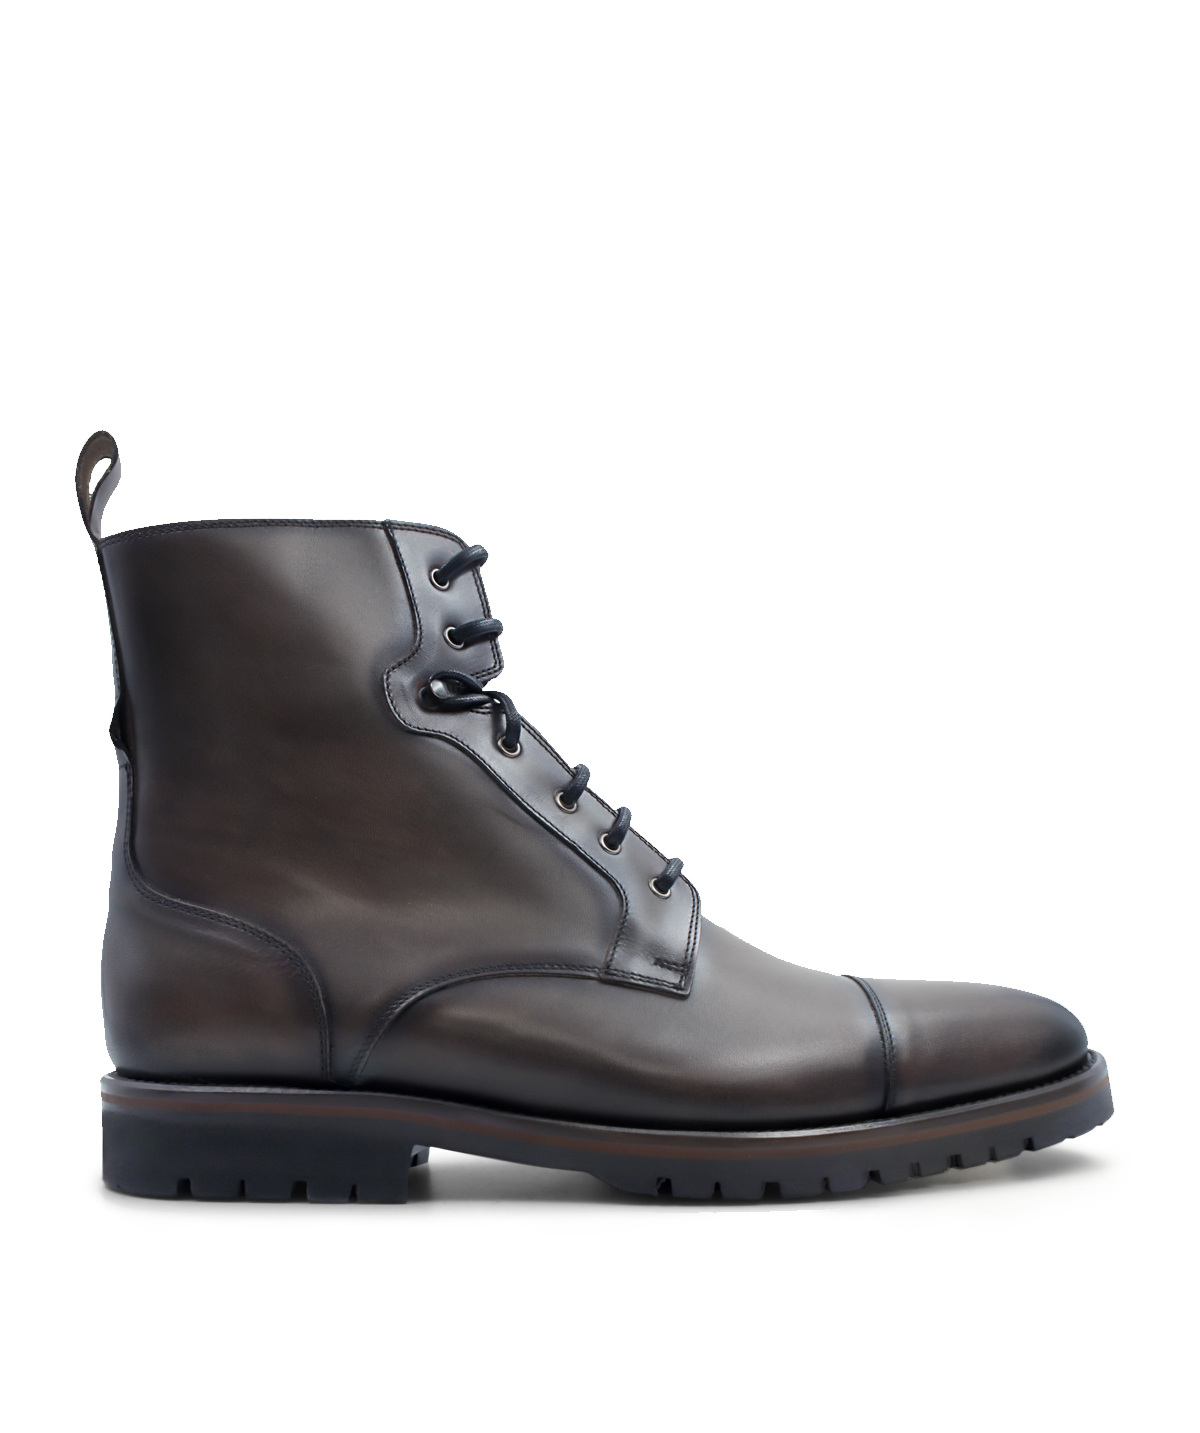 Boots POWELL Grey